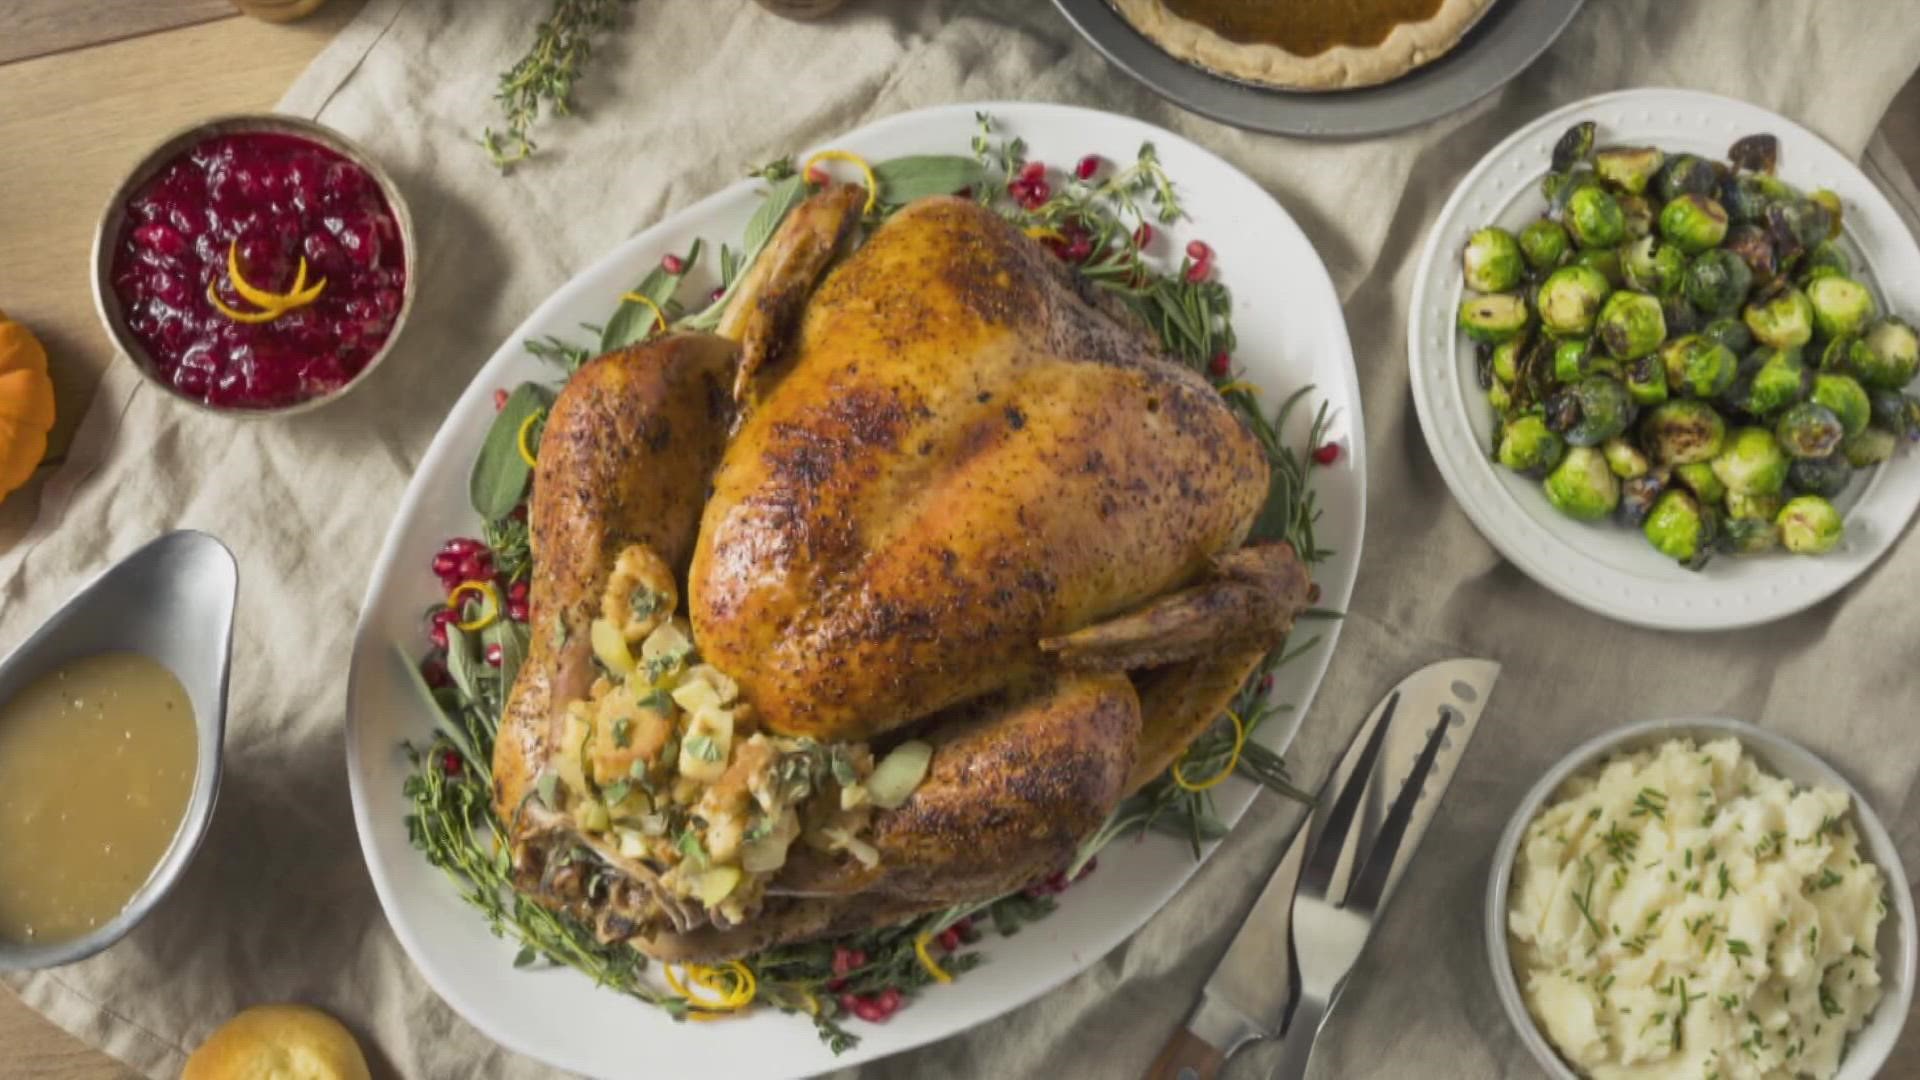 First, set your turkey out to thaw on Tuesday evening. The Food Network says this is the best way to ensure your turkey is thawed. Watch for the rest of the tips!